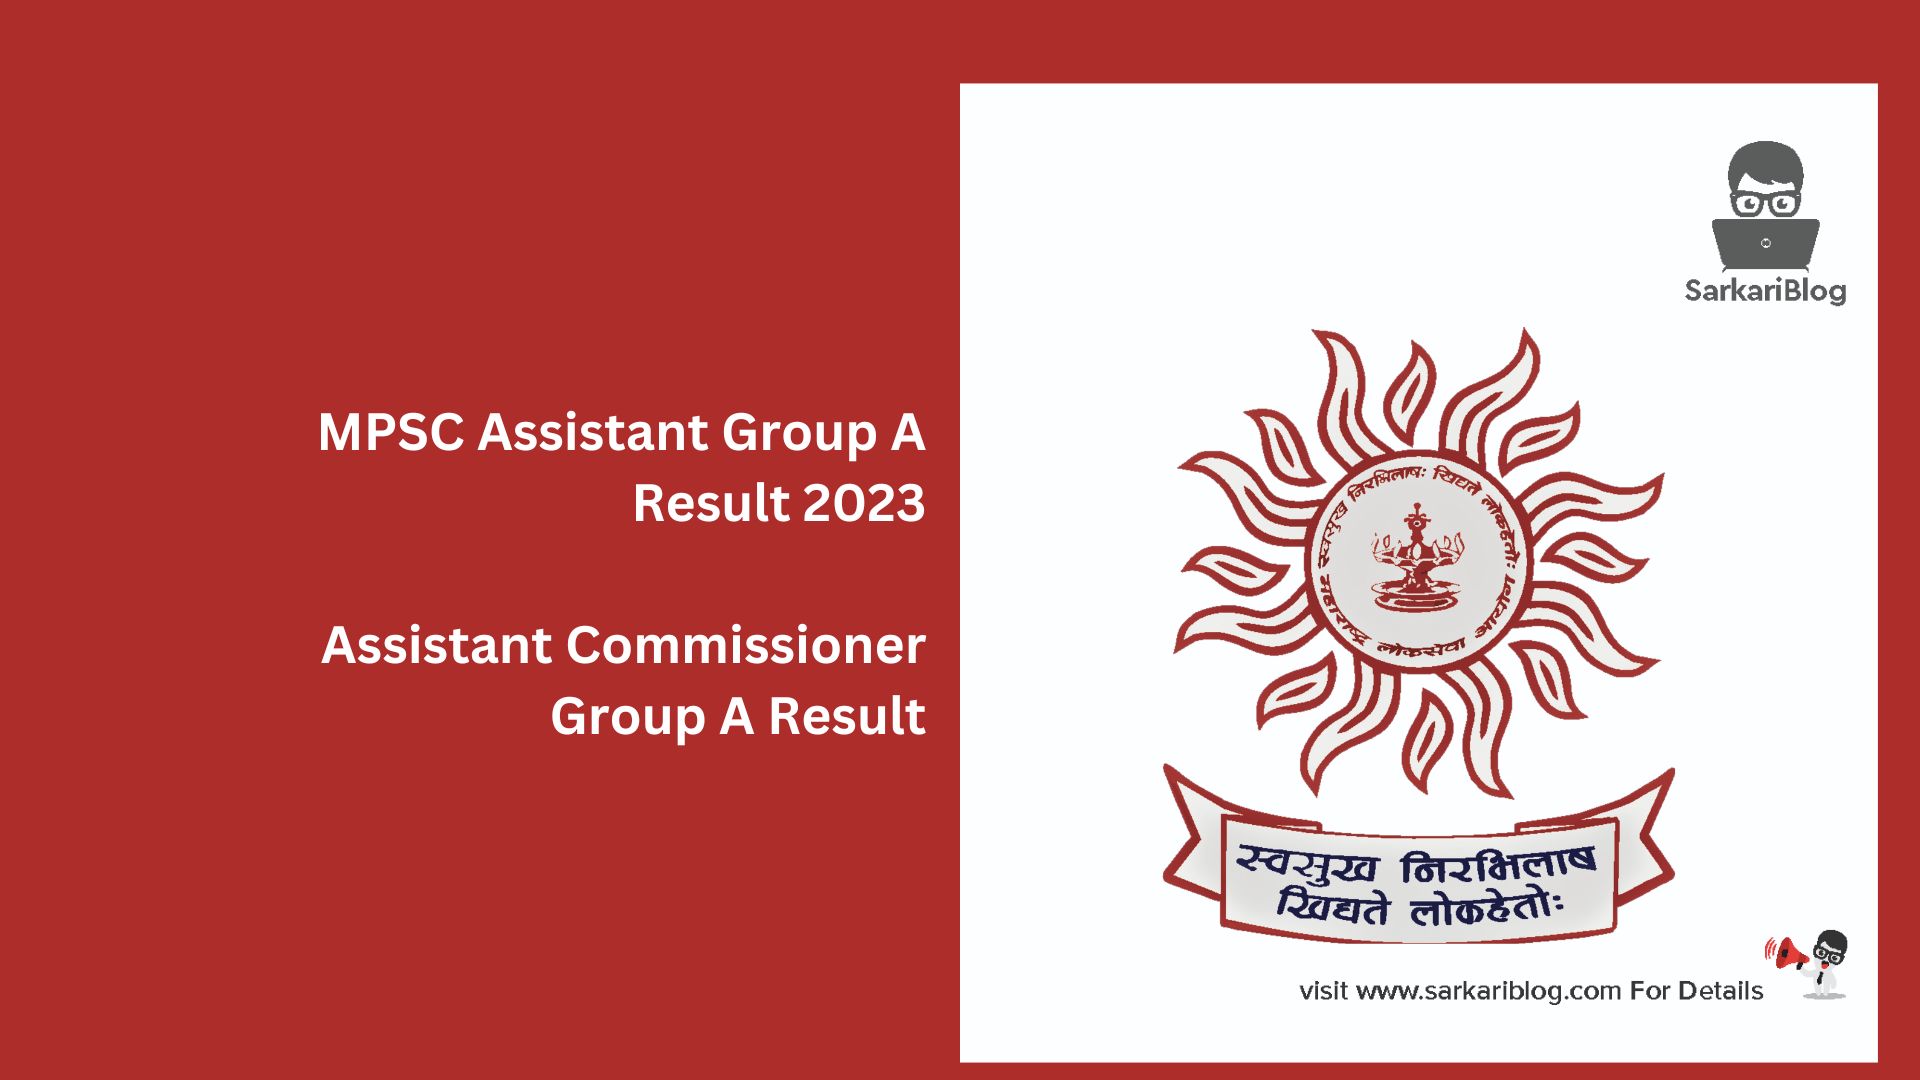 MPSC Assistant Group A Result 2023